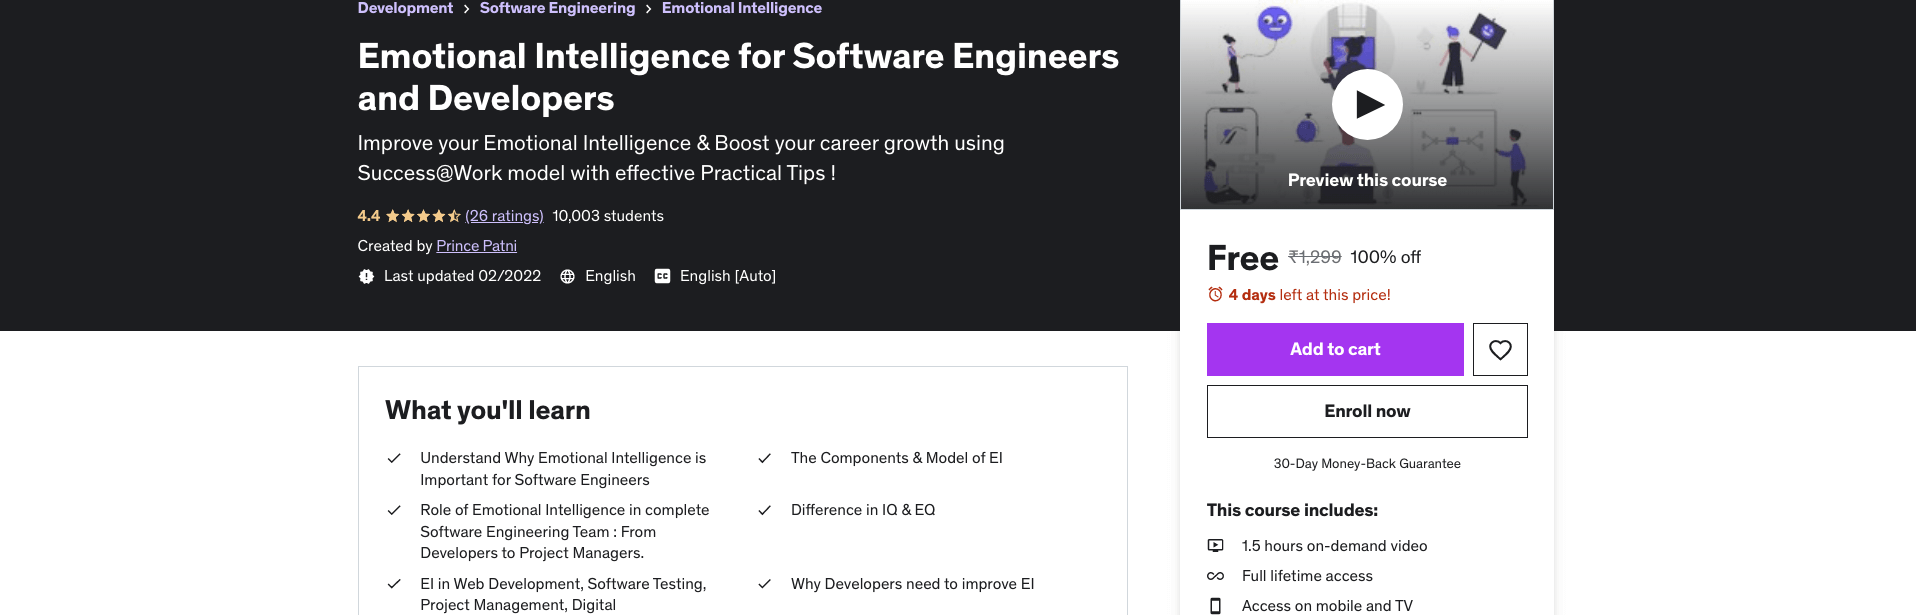 Emotional Intelligence for Software Engineers and Developers 